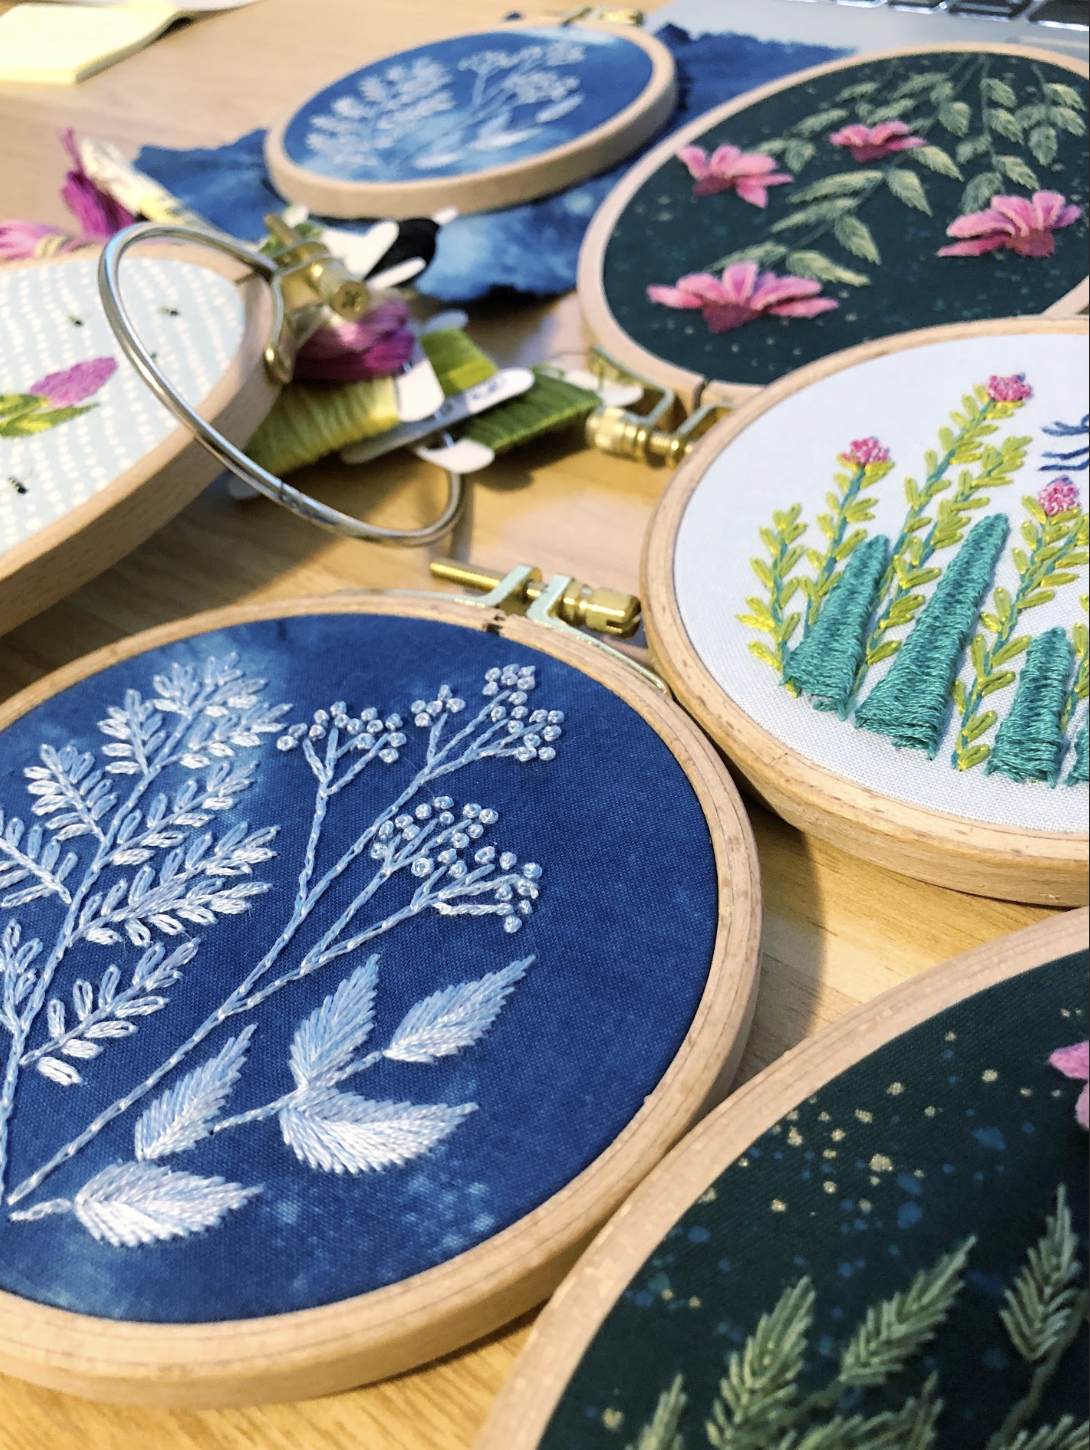 EMBROIDERY CLASS: Embroider a Botanical Cyanotype